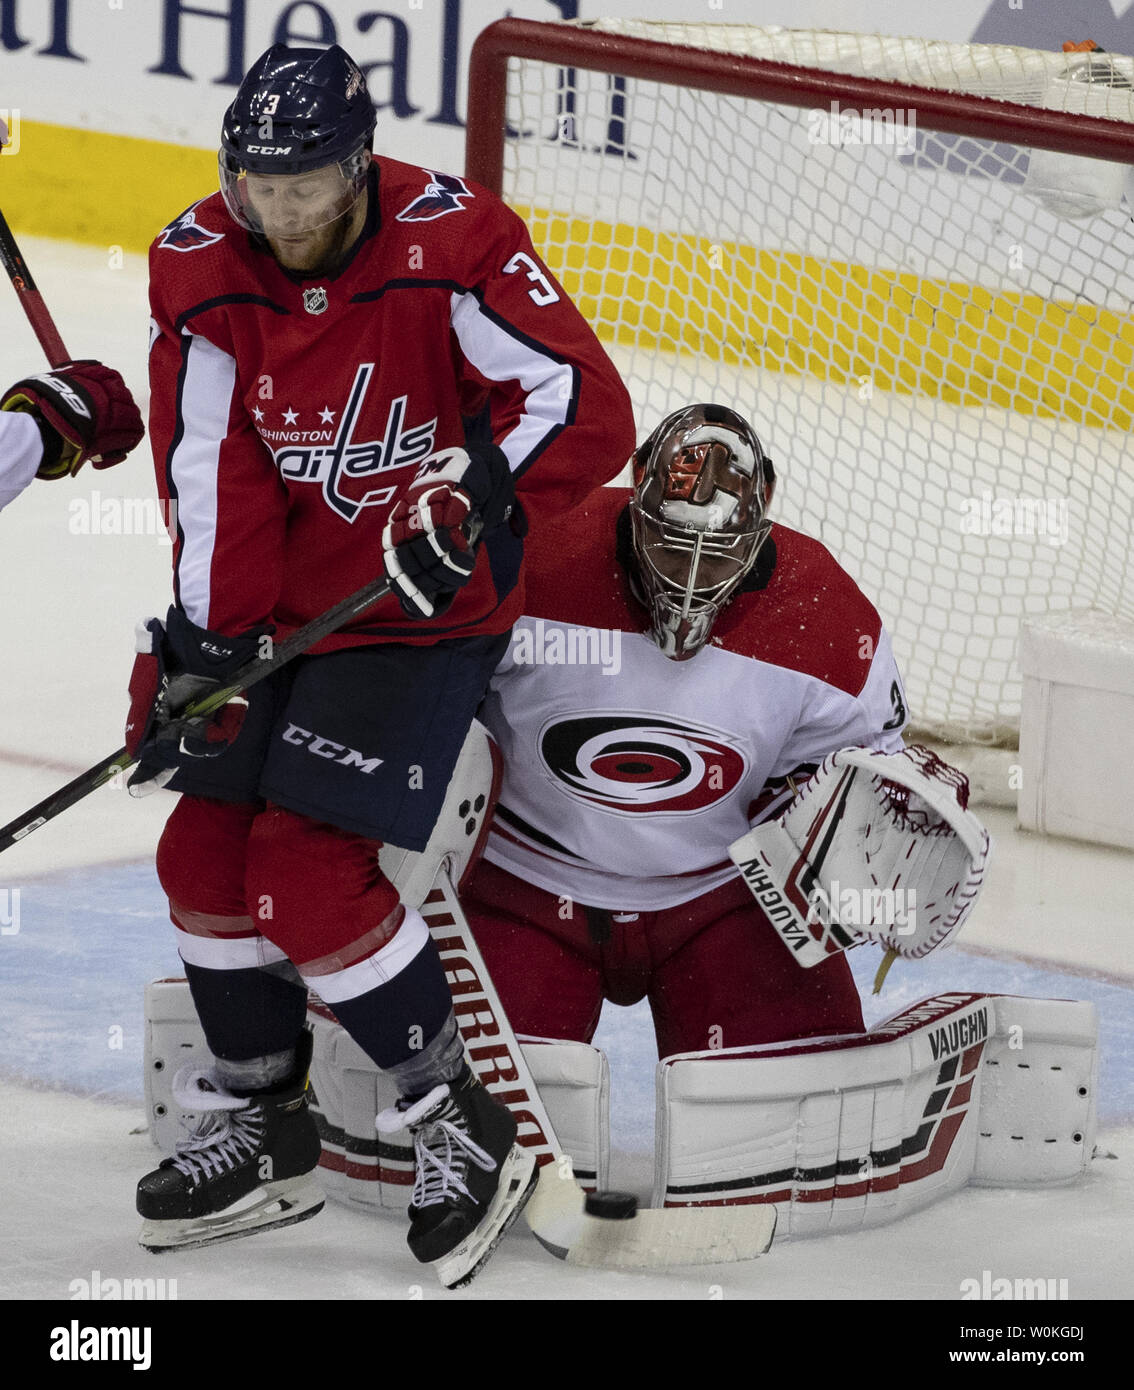 Washington Capitals defenseman Nick Jensen (3) screens Carolina Hurricanes goaltender Petr Mrazek (34) on a shot by Capitals right wing Tom Wilson (43) during the third period at Capital One Arena in Washington, D.C. on April 13, 2019. The Washington Capitals lead the best of seven series with one win. Photo by Alex Edelman/UPI Stock Photo